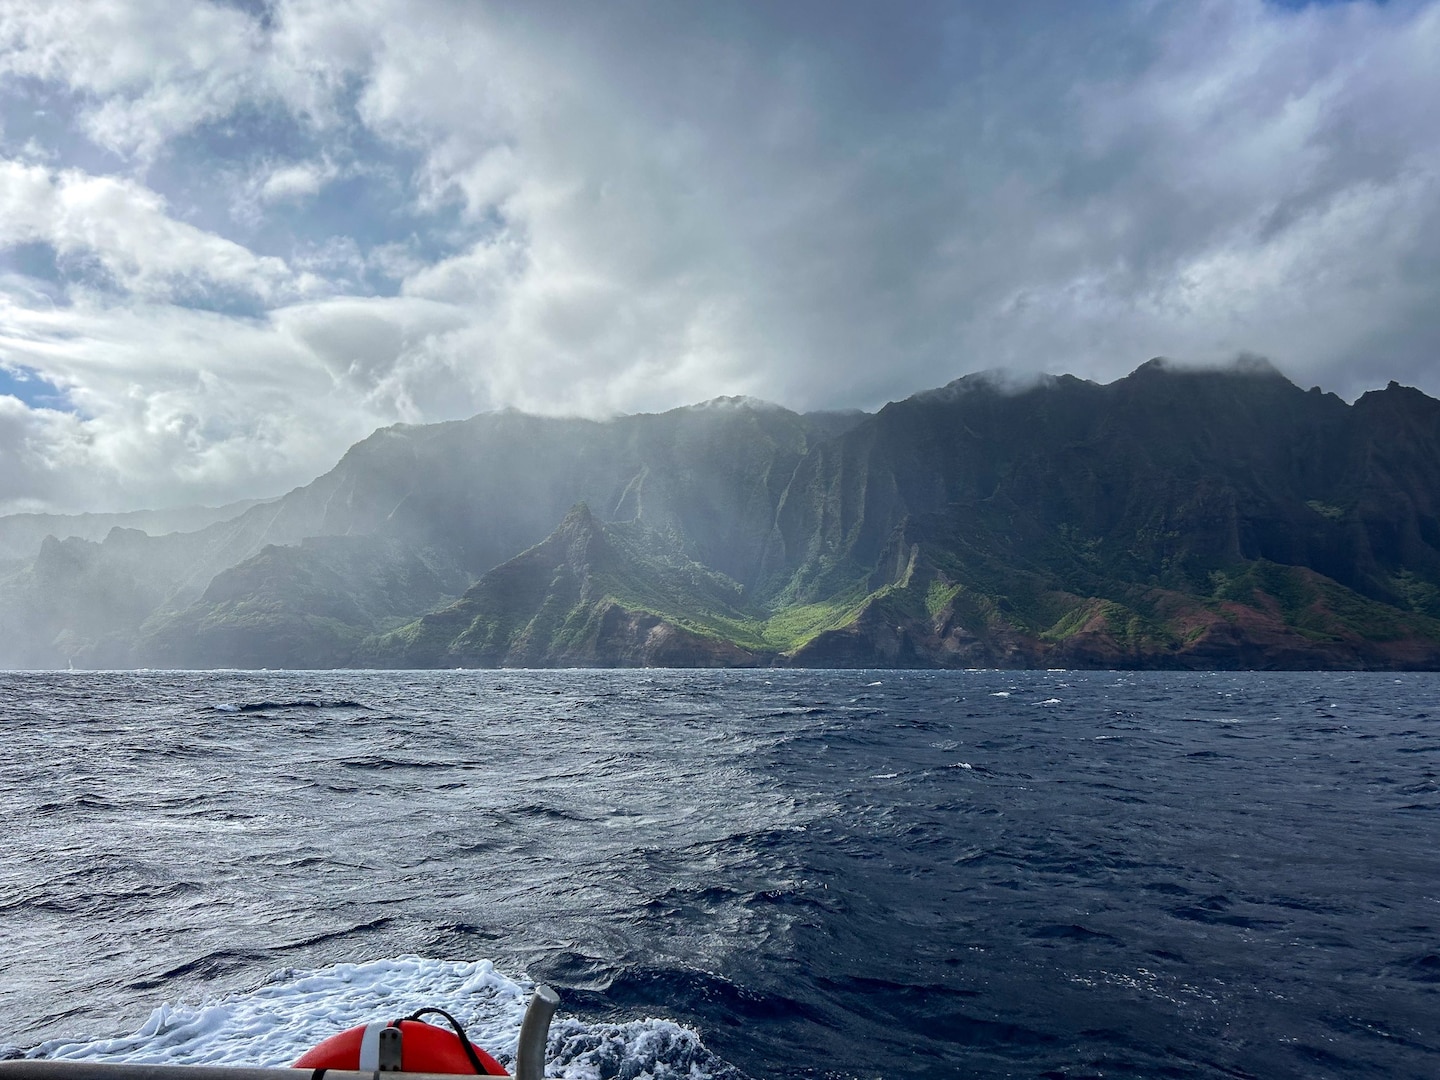 Coast Guard Suspends search for 2 after helicopter crash near Na Pali Coast